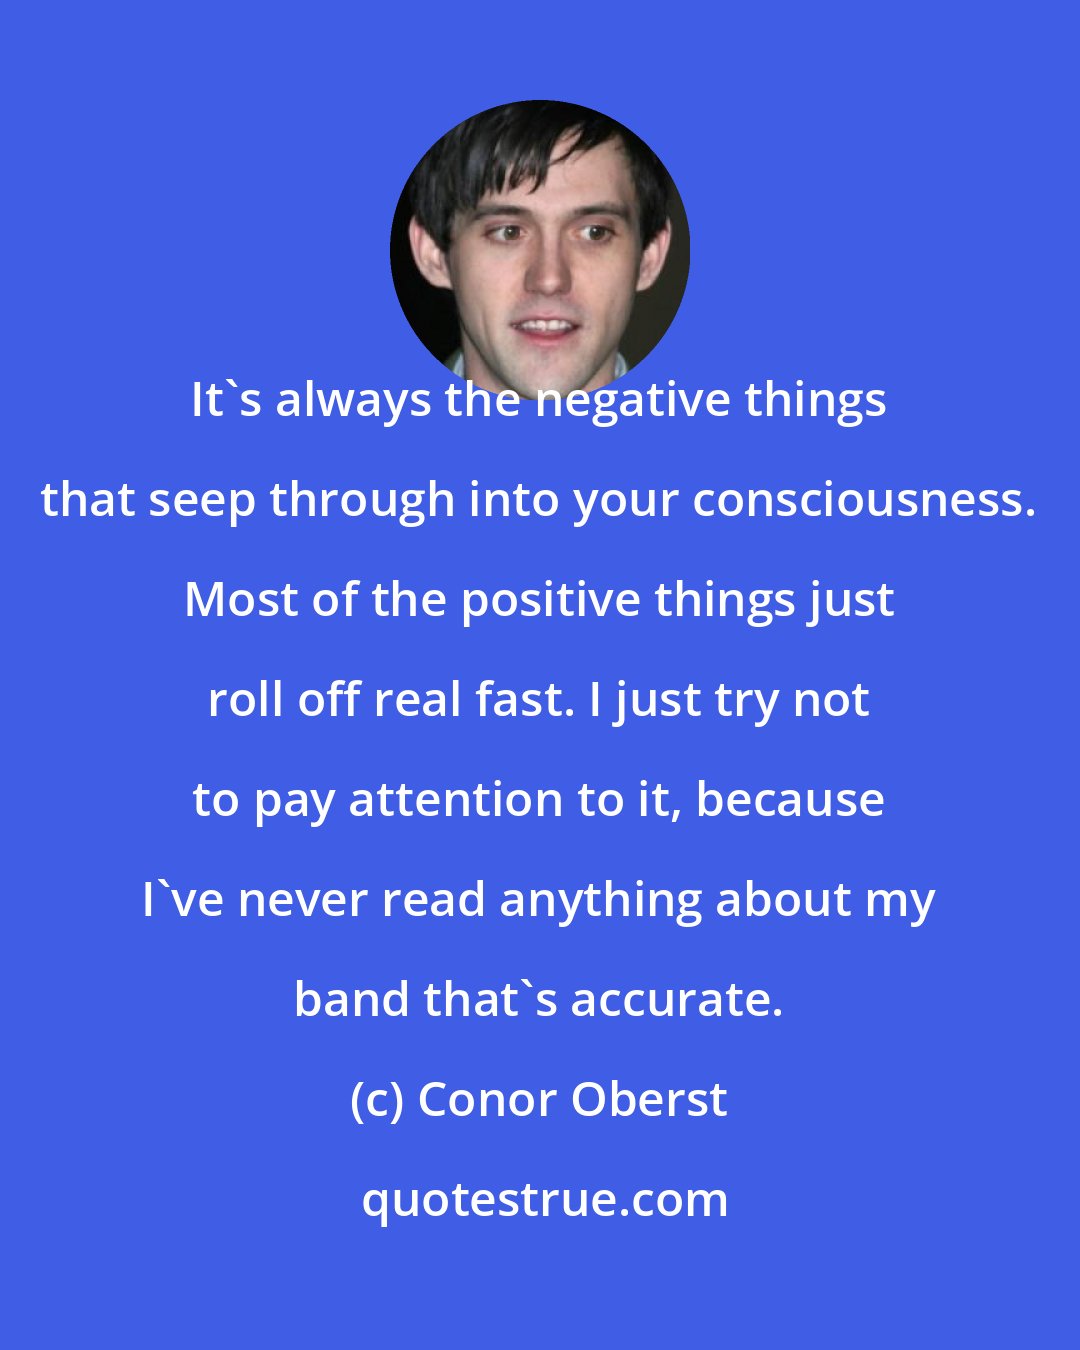 Conor Oberst: It's always the negative things that seep through into your consciousness. Most of the positive things just roll off real fast. I just try not to pay attention to it, because I've never read anything about my band that's accurate.